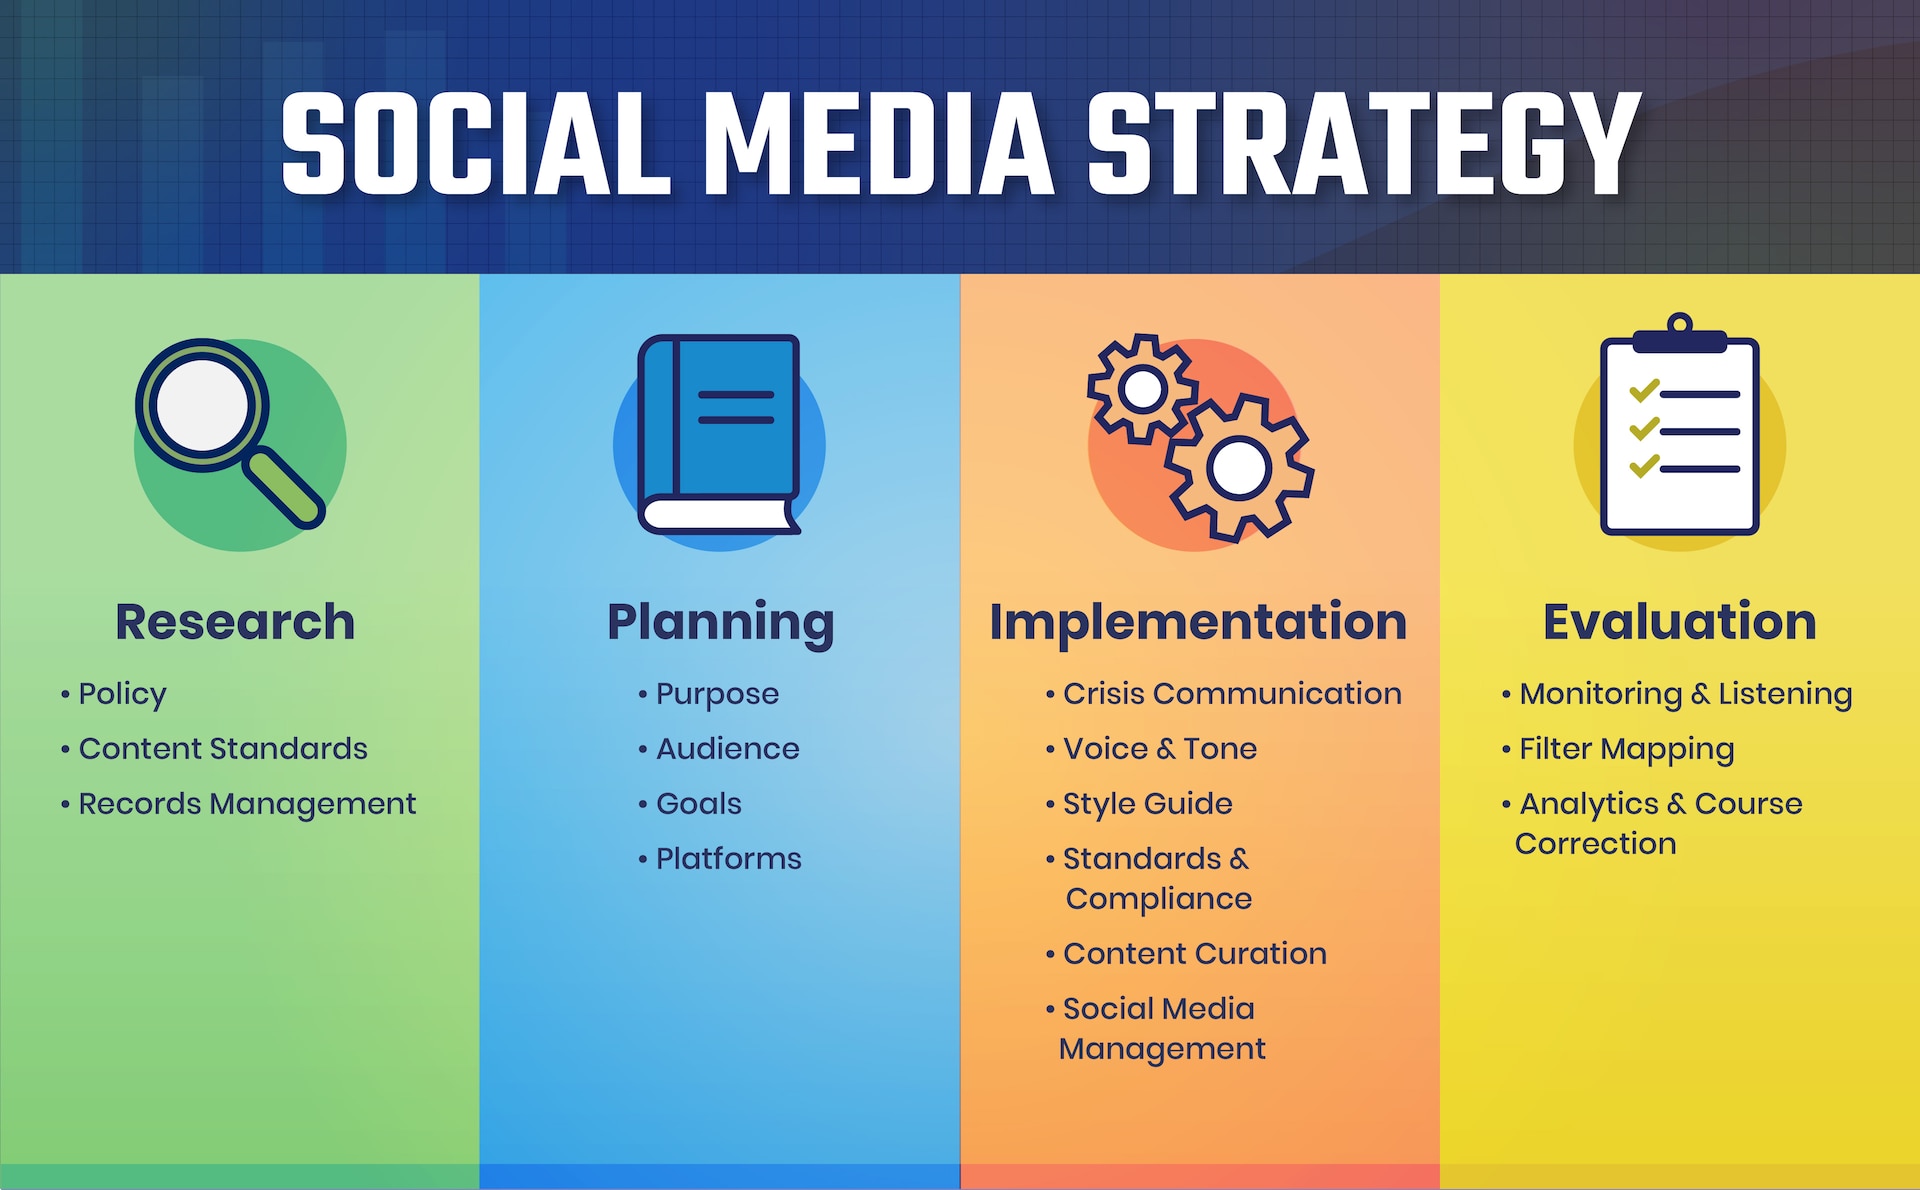 A graphic depicting the four sections of a social media strategy: Research, Planning, Implementation and Evaluation. Within each section are bullets providing key points on what each section entails.